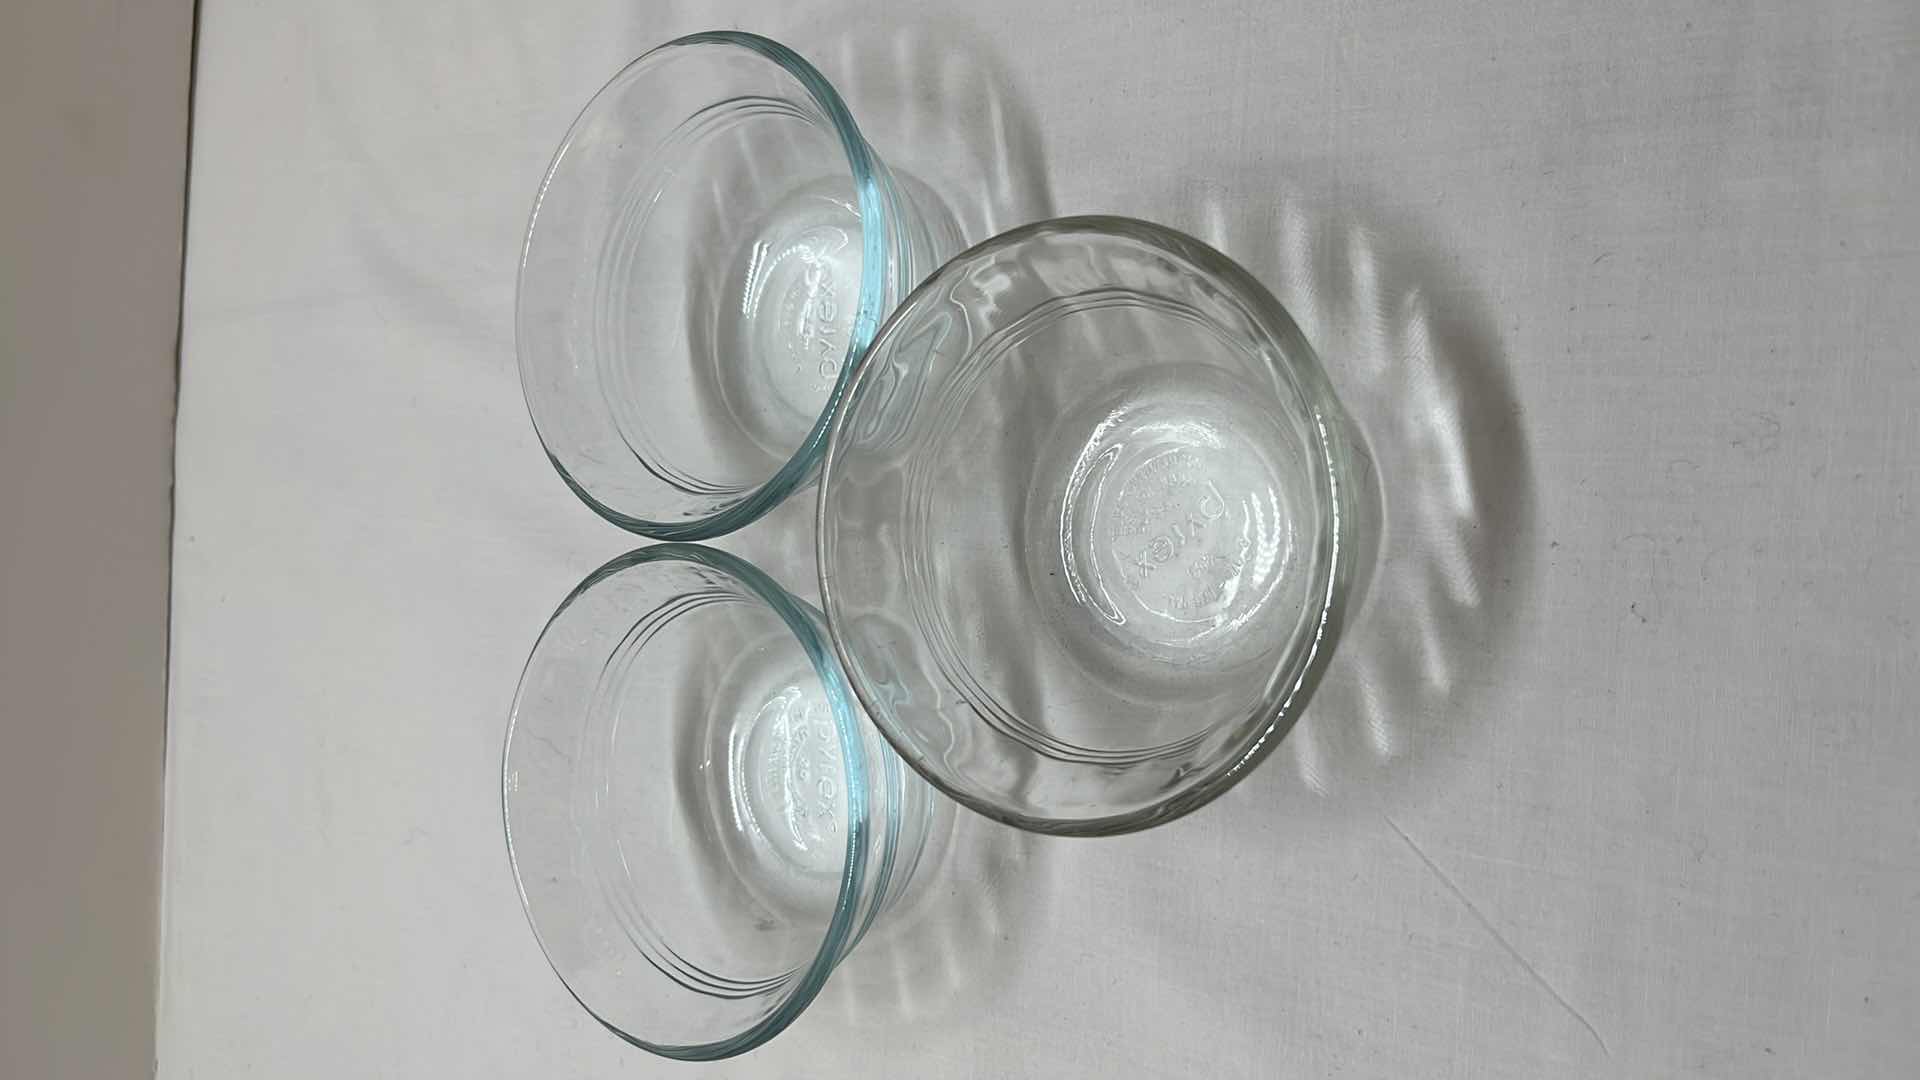 Photo 4 of PYREX GLASS MEASURING CUPS (2), 6 OZ MEASURING BOWLS (3) & RUBBERMAID GLASS SQUARE BOWLS (2)